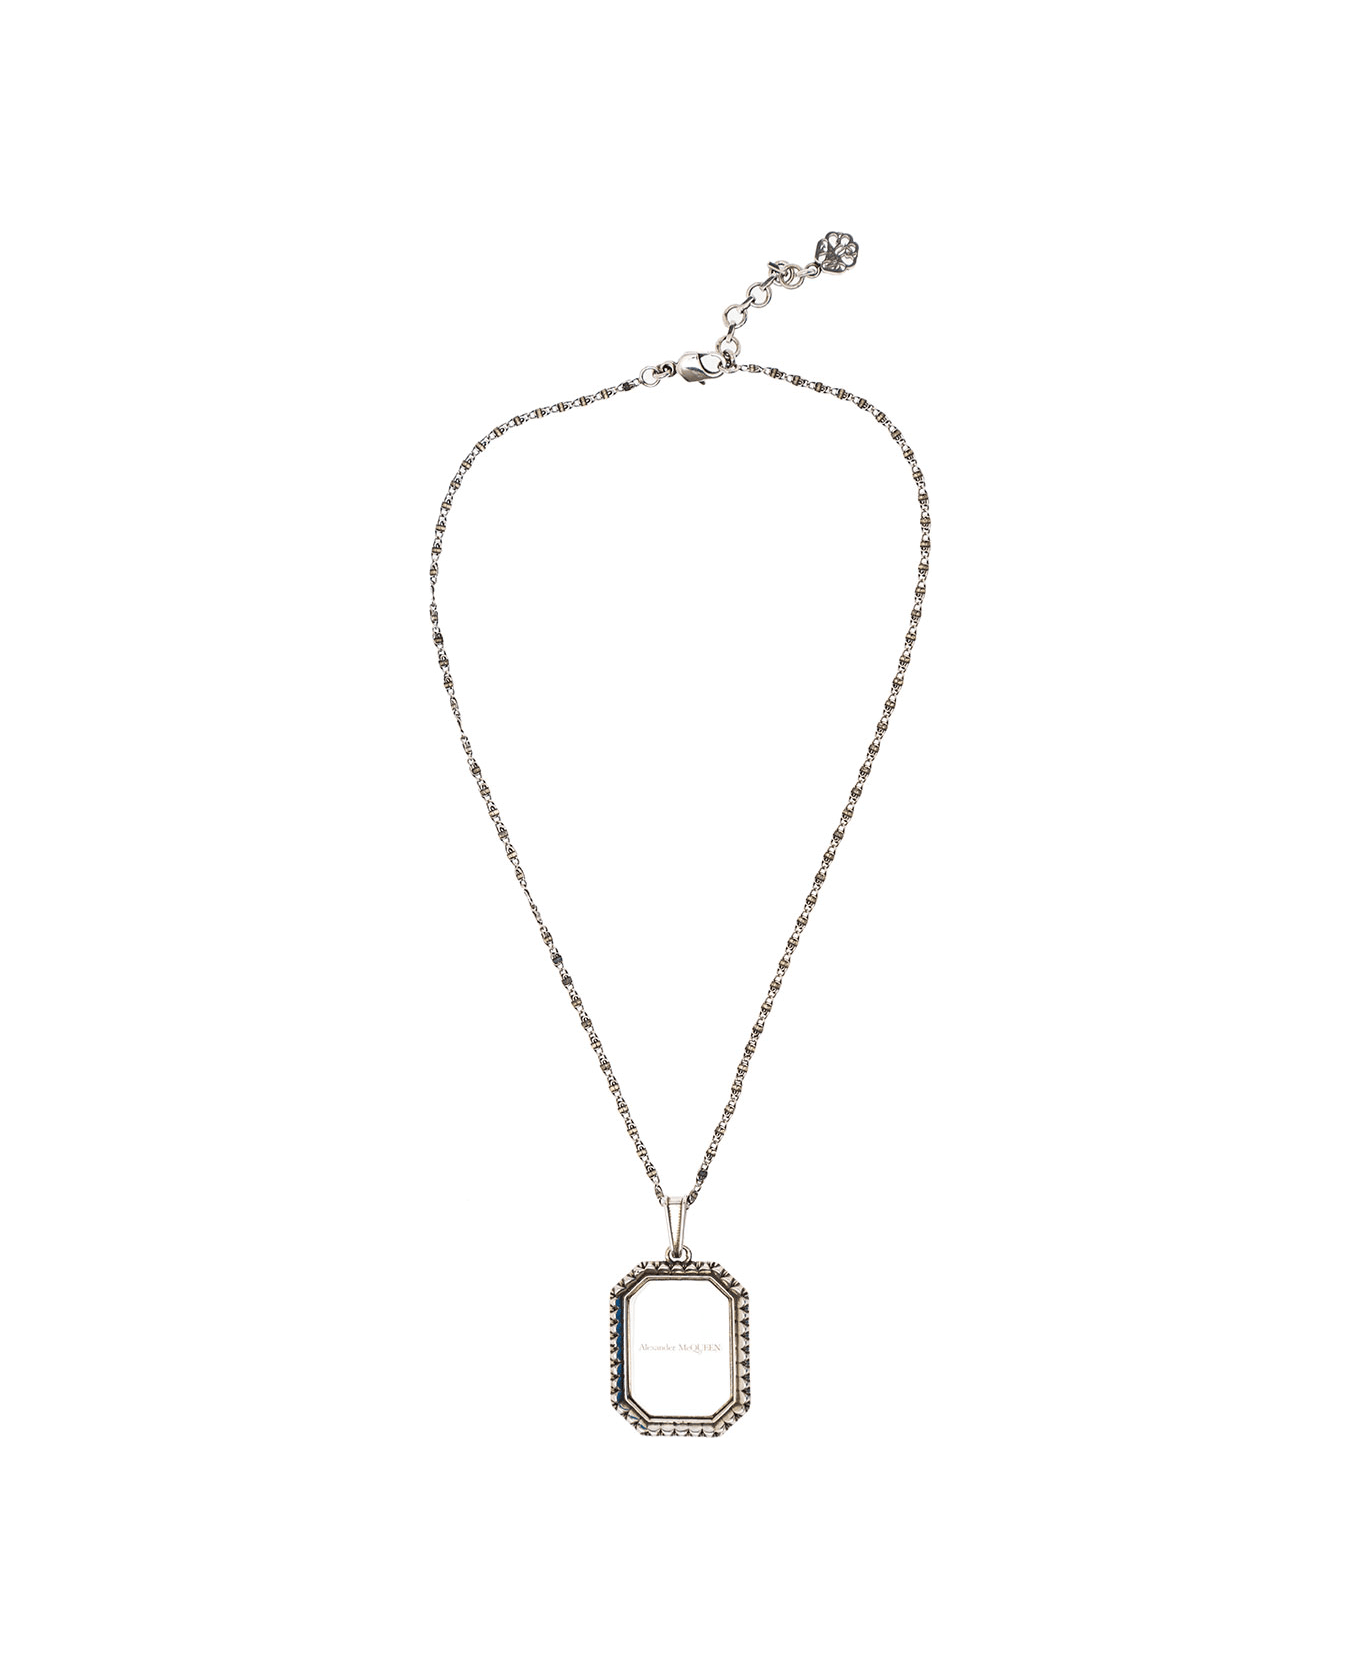 Alexander McQueen Woman's Brass Chain Necklace With Logo Pendant Detail - Metallic ネックレス